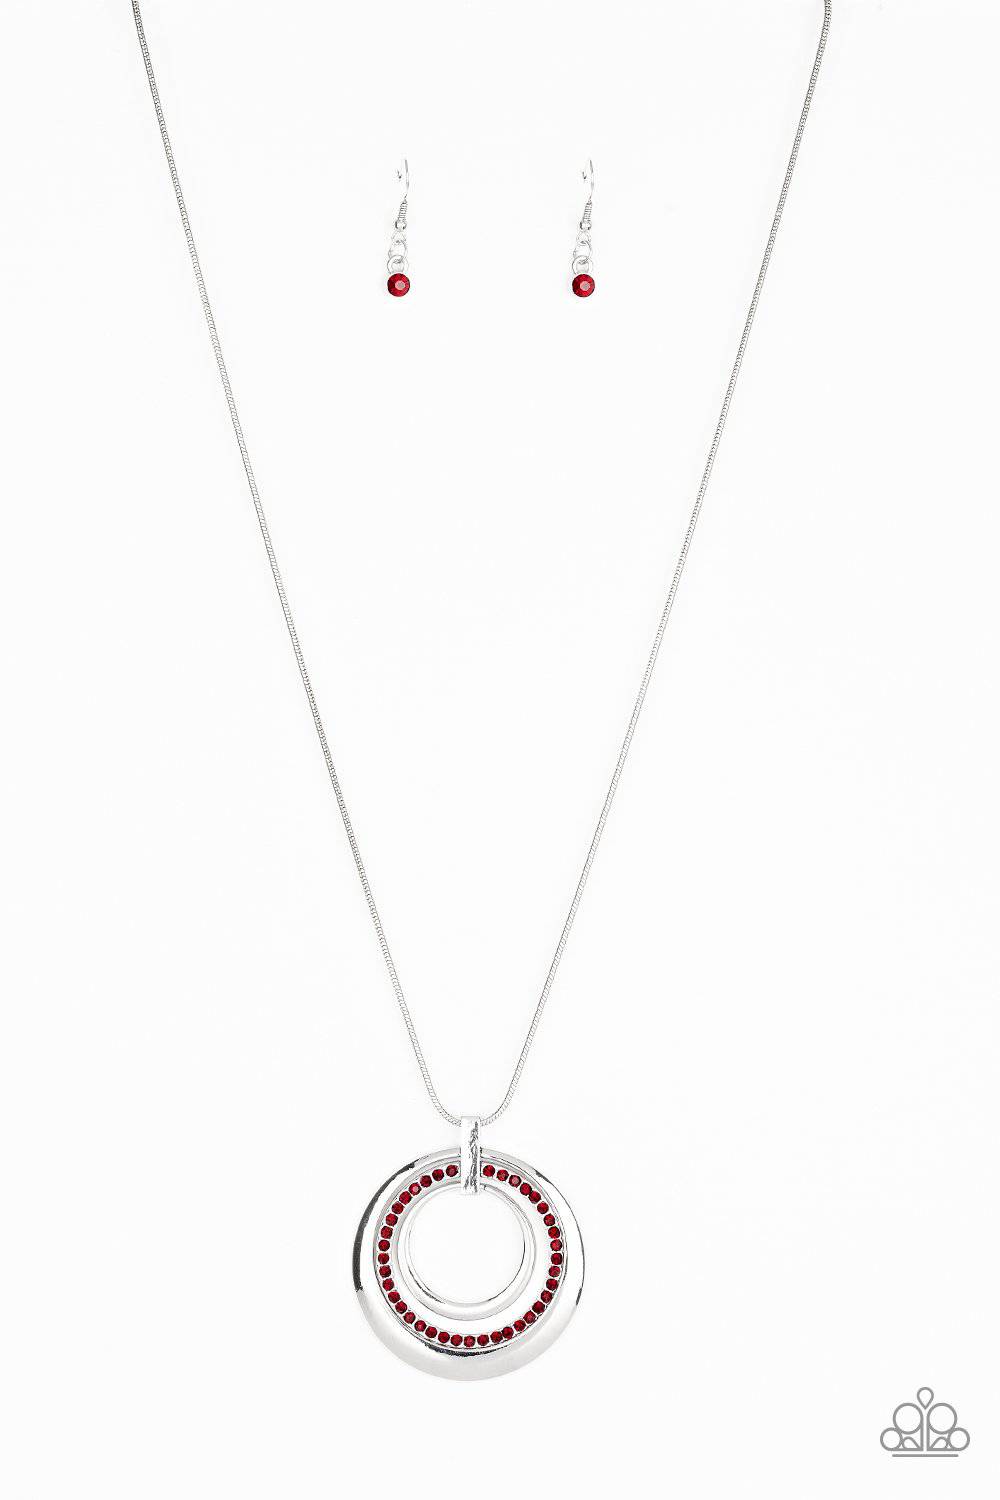 A160 - Gather Around Gorgeous Red Necklace by Paparazzi Accessories on Fancy5Fashion.com